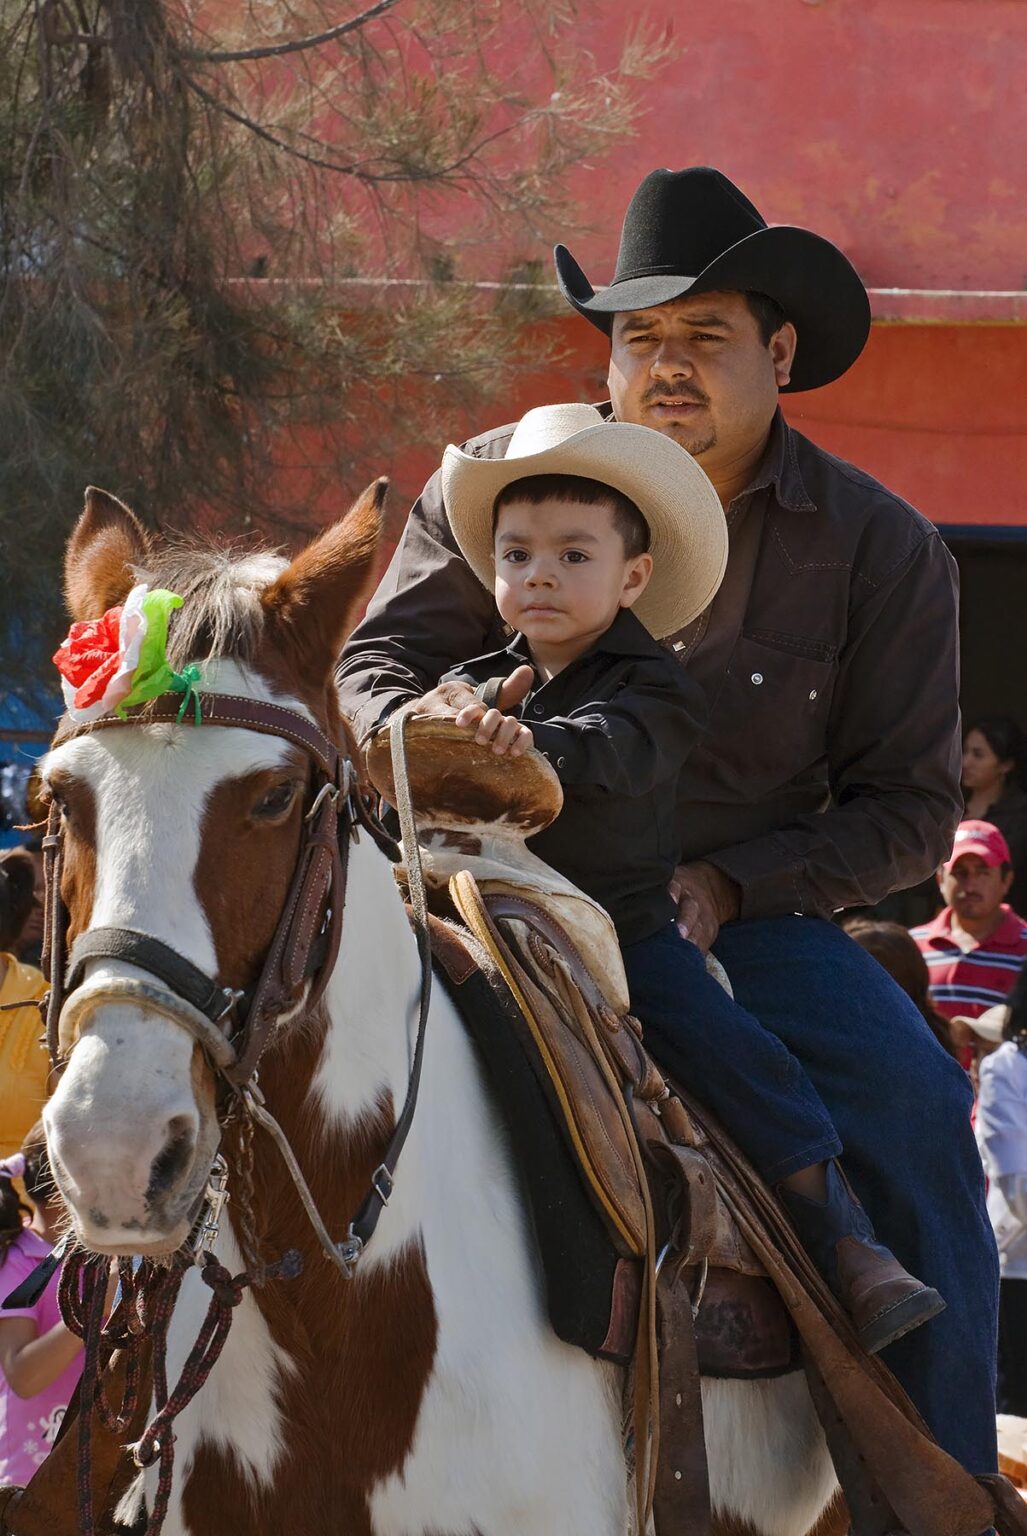 CABALLEROS or Mexican cowboys both young and old ride into town to celebrate the festival of the VIRGIN OF GUADALUPE - LOS RODRIGUEZ, GUANAJUATO, MEXICO